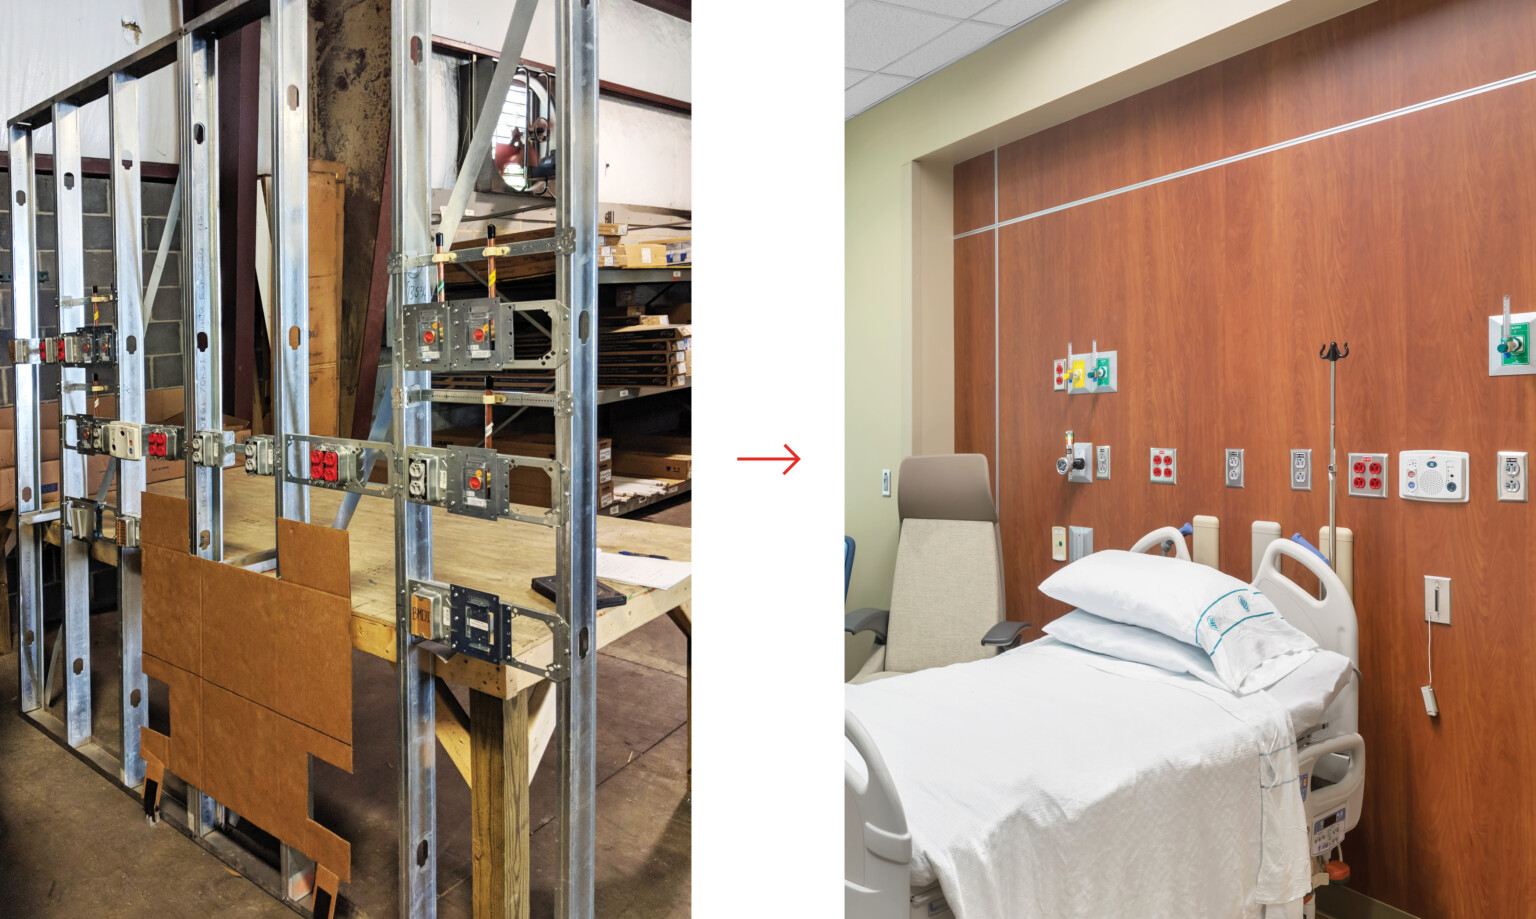 Before and after images of wall of room during the construction process and completed with hospital bed in front of it